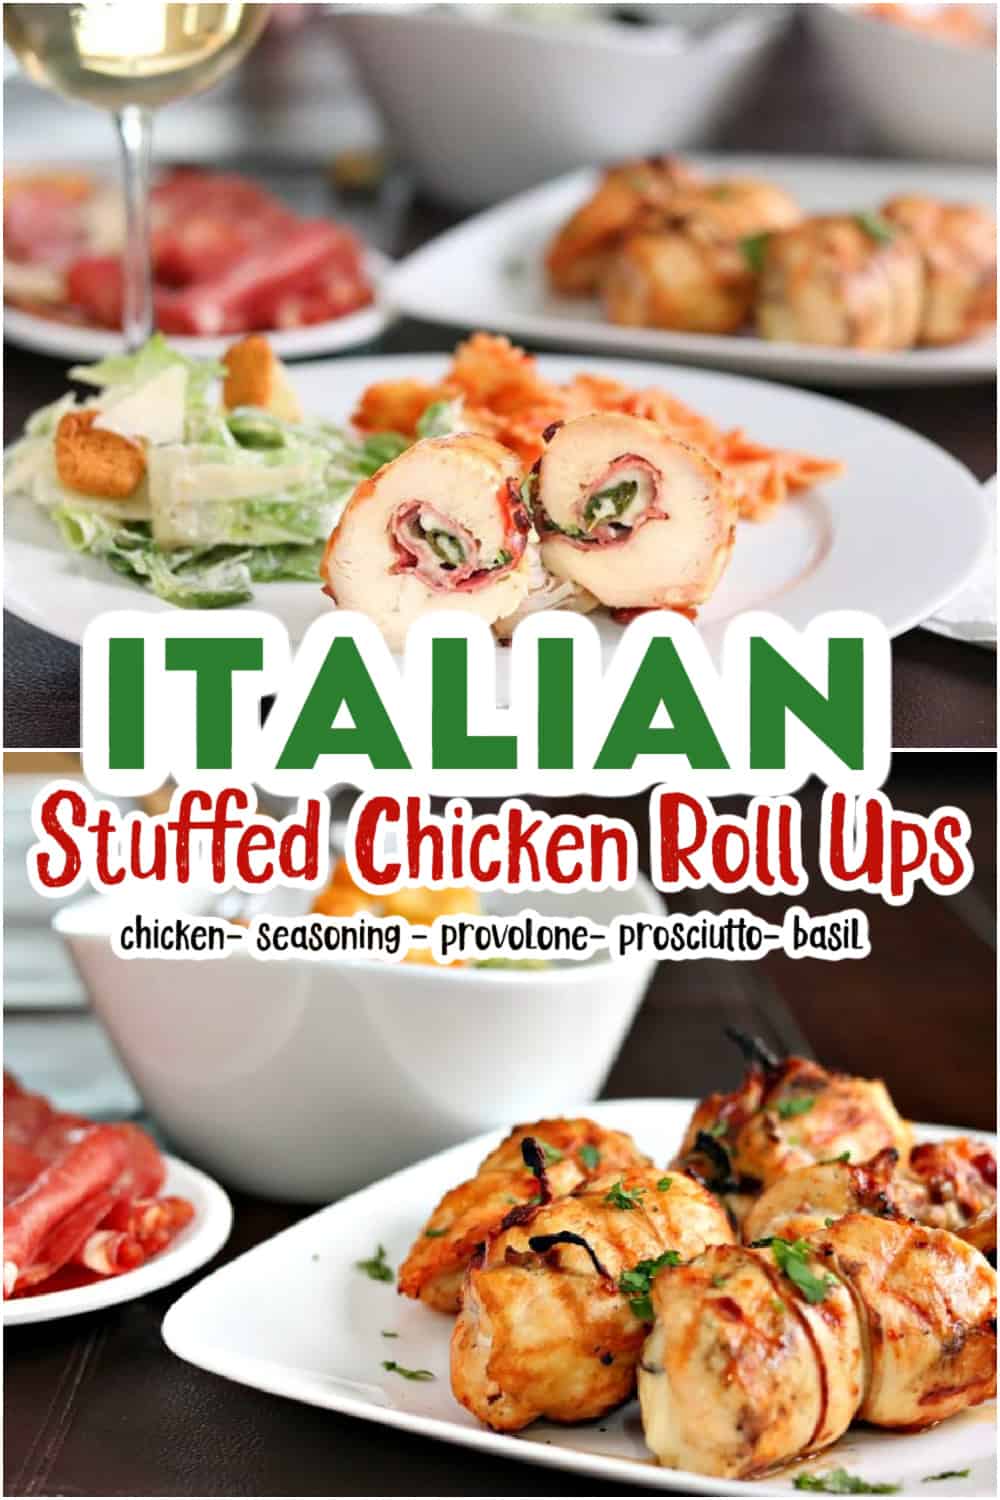 collage of stuffed chicken roll ups with recipe name and ingredients overlaid in text.